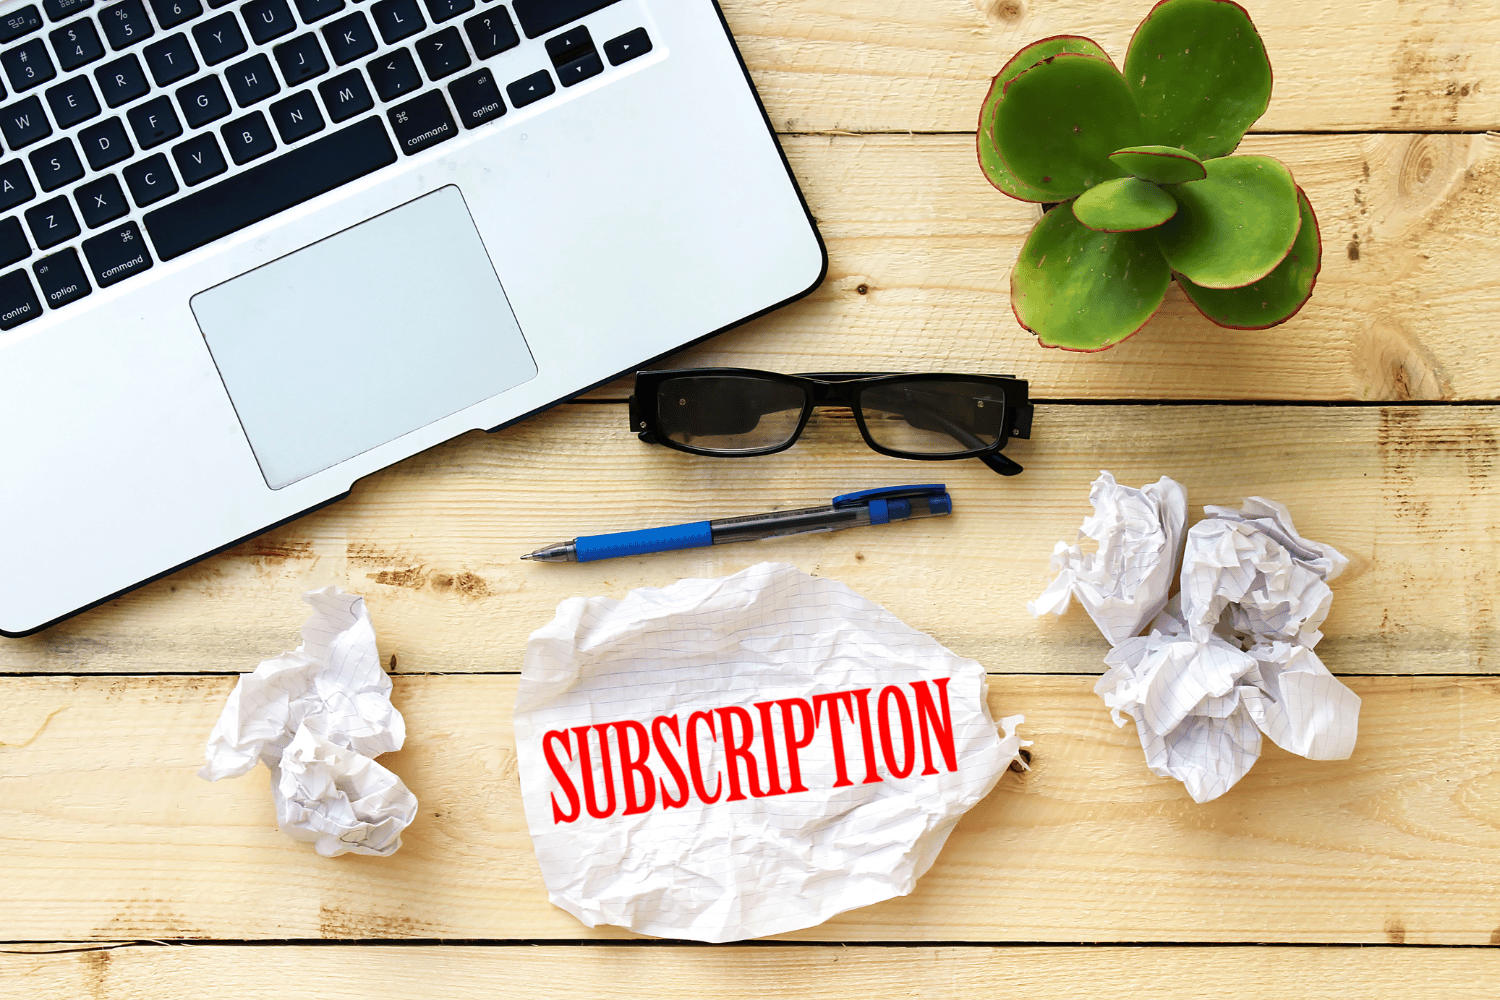 Subscription written on a piece of paper, with a laptop and desk in the background.